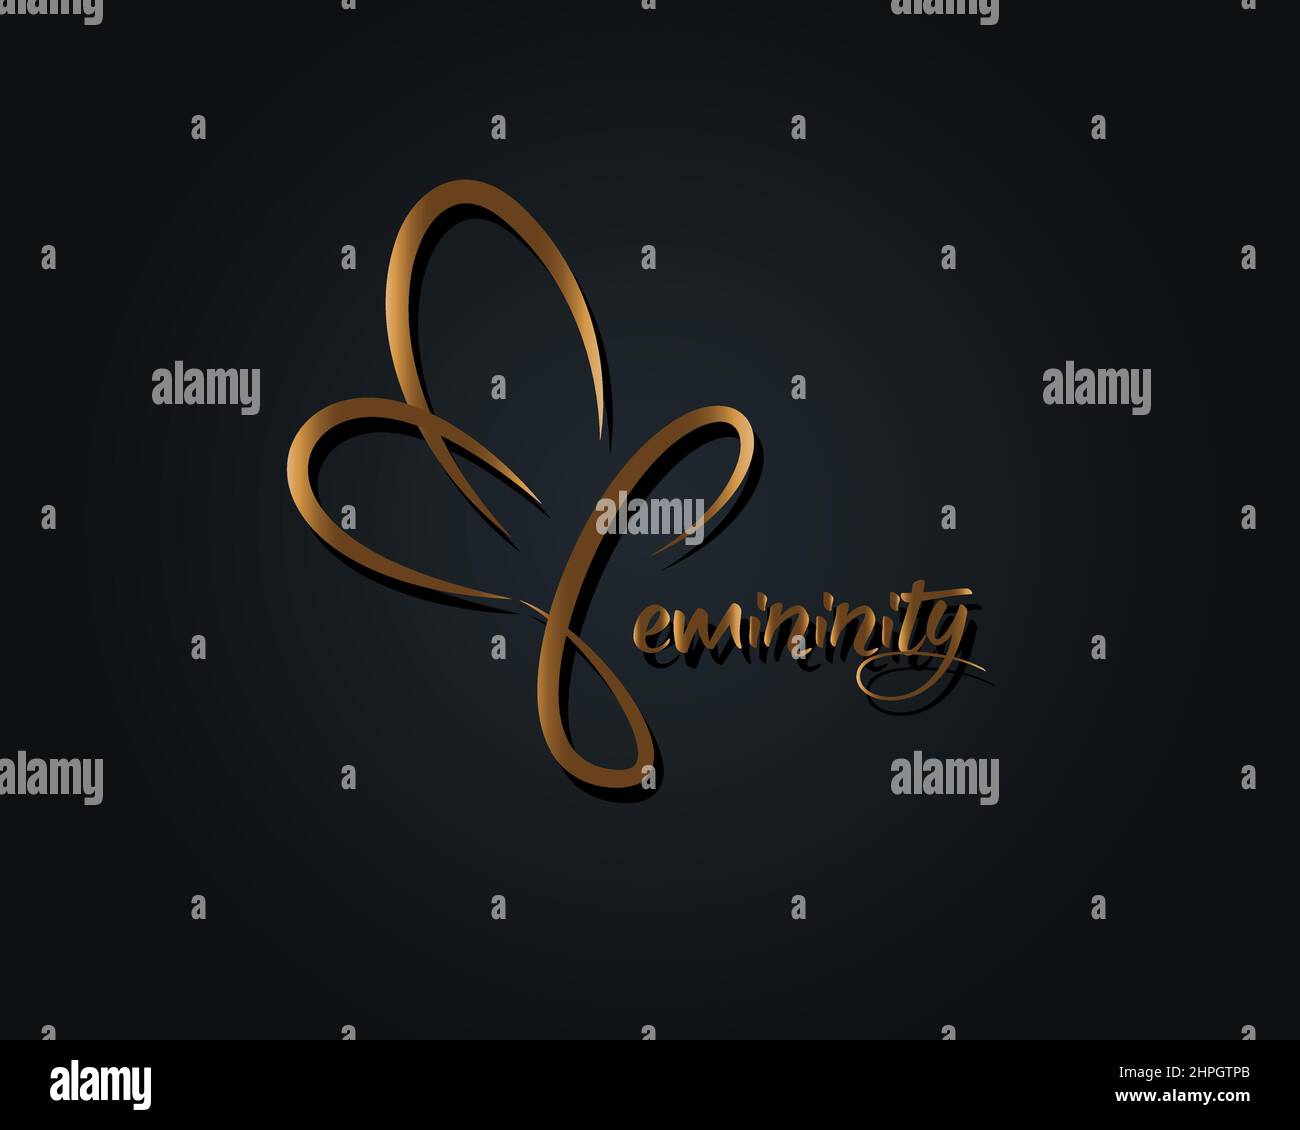 Golden butterfly vector logo template, femininity hand drawn lettering concept. Typography text for t shirts, posters, wall art, gold line print sign Stock Vector